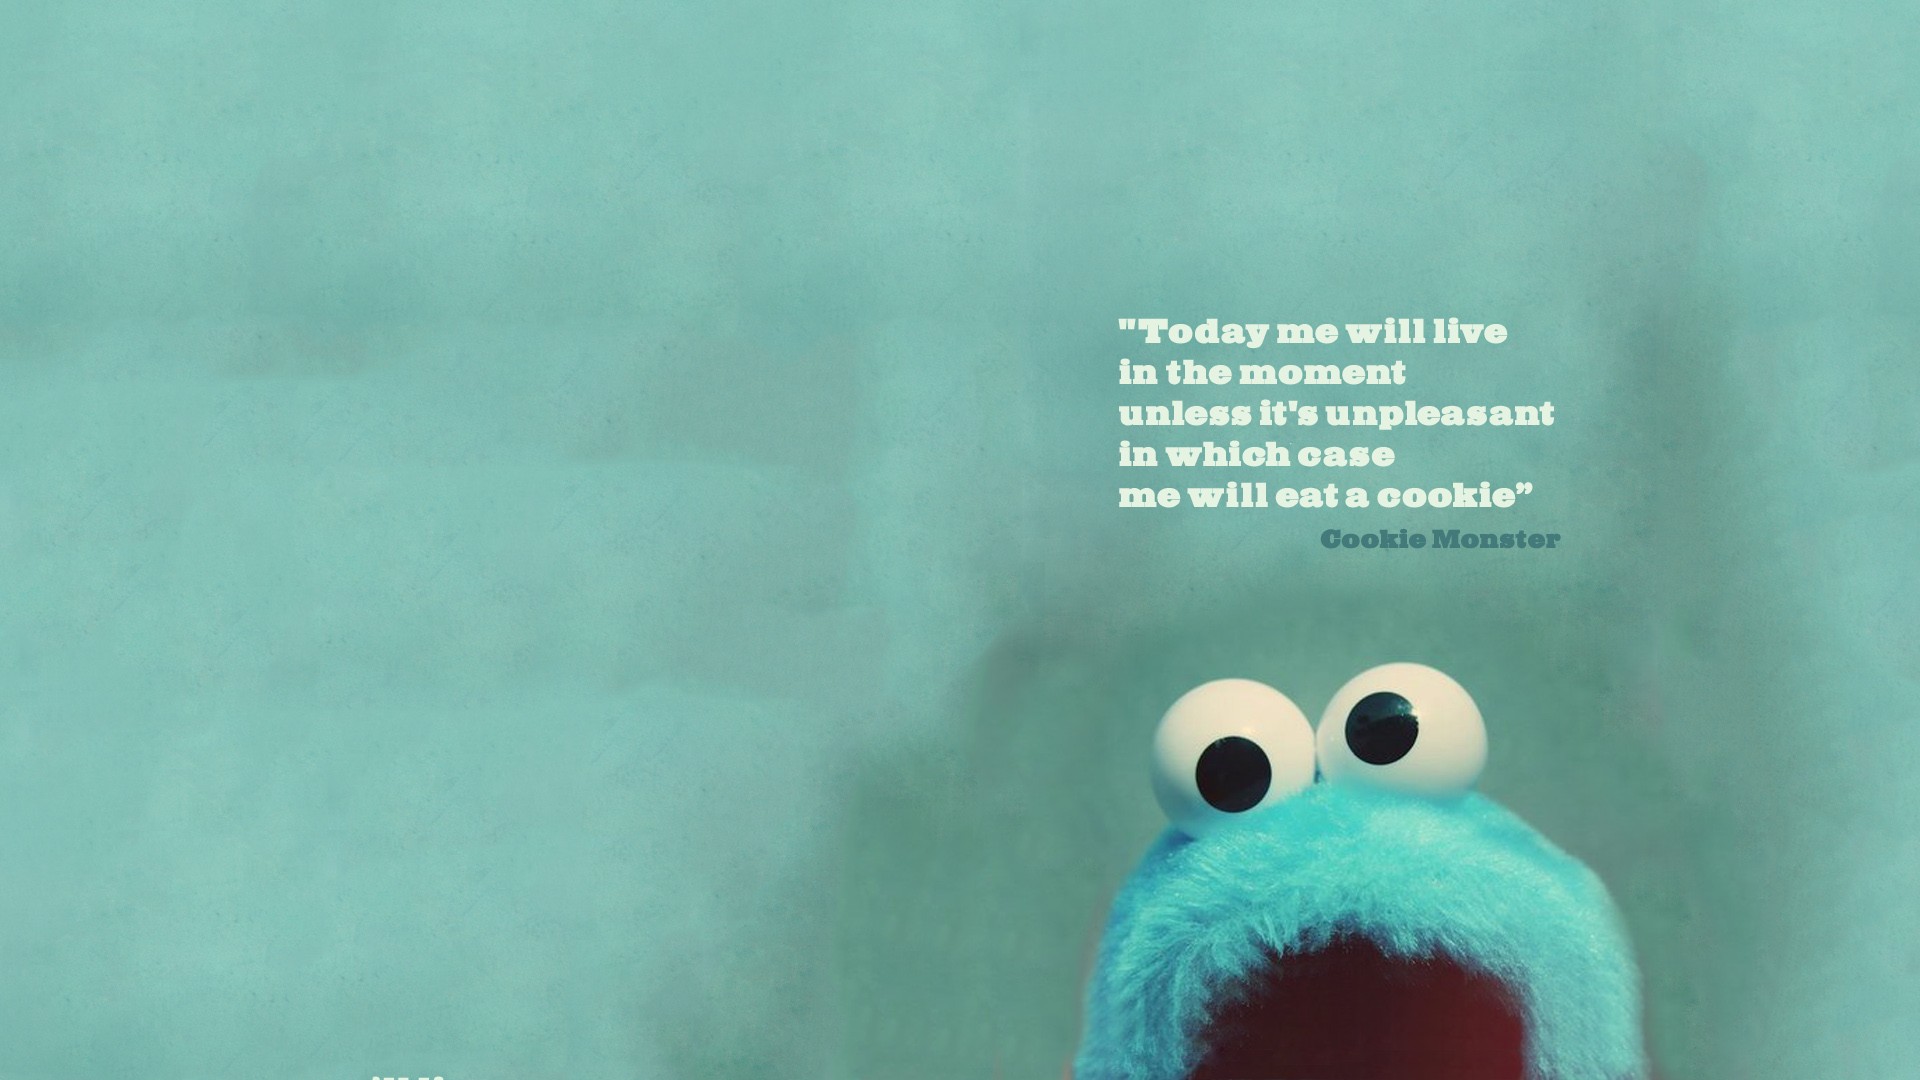 Free Download Cookie Monster Quote Wallpapers Hd 1920x1080 For Your Desktop Mobile Tablet Explore 76 Quote Wallpapers For Desktop Love Quotes Wallpapers For Desktop Christian Wallpapers Inspirational Free Christian